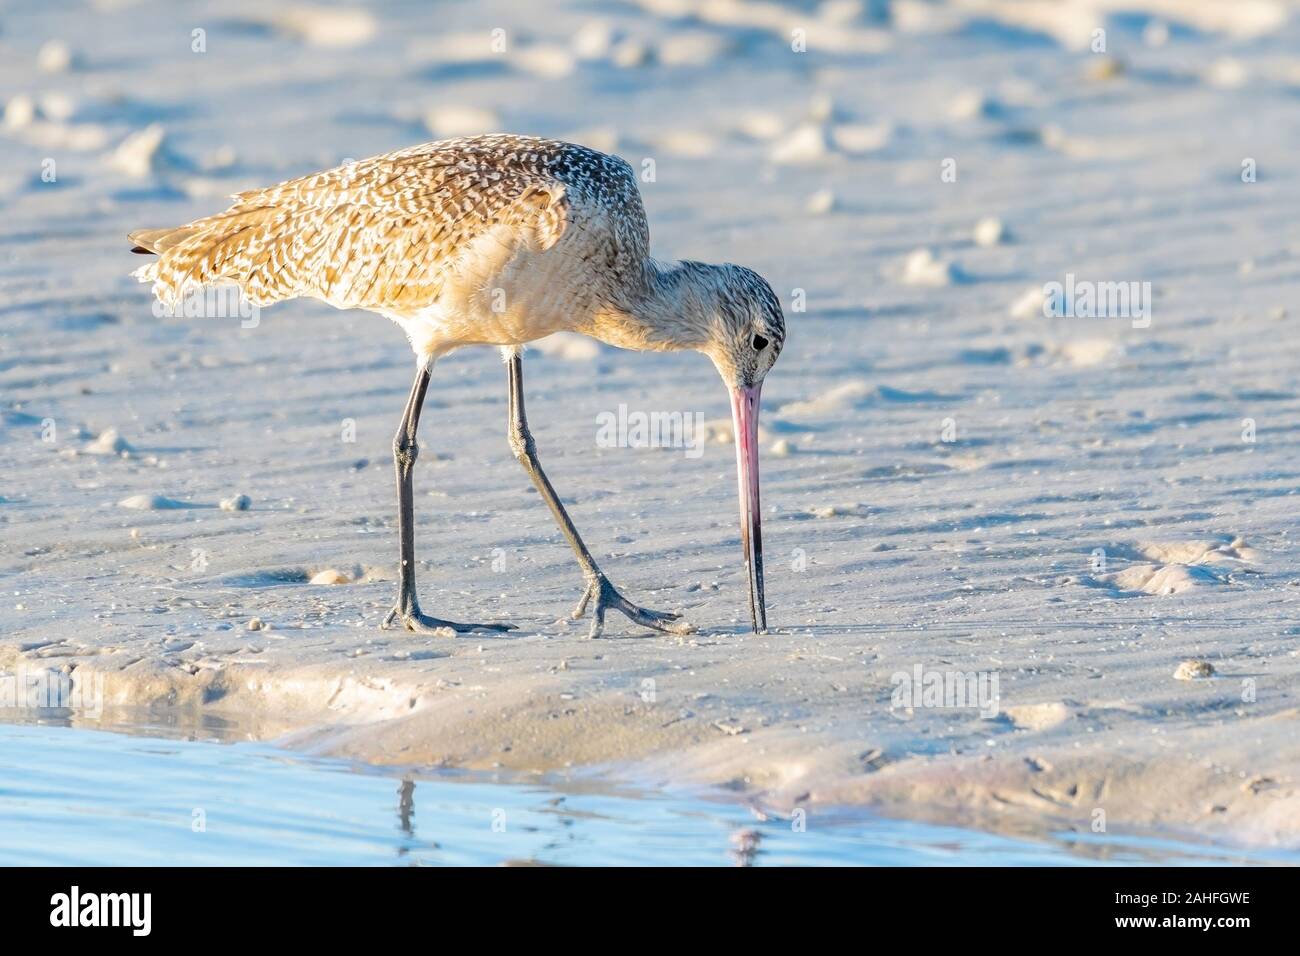 Marbled godwit on the shore of the Gulf of Mexico - Florida Stock Photo